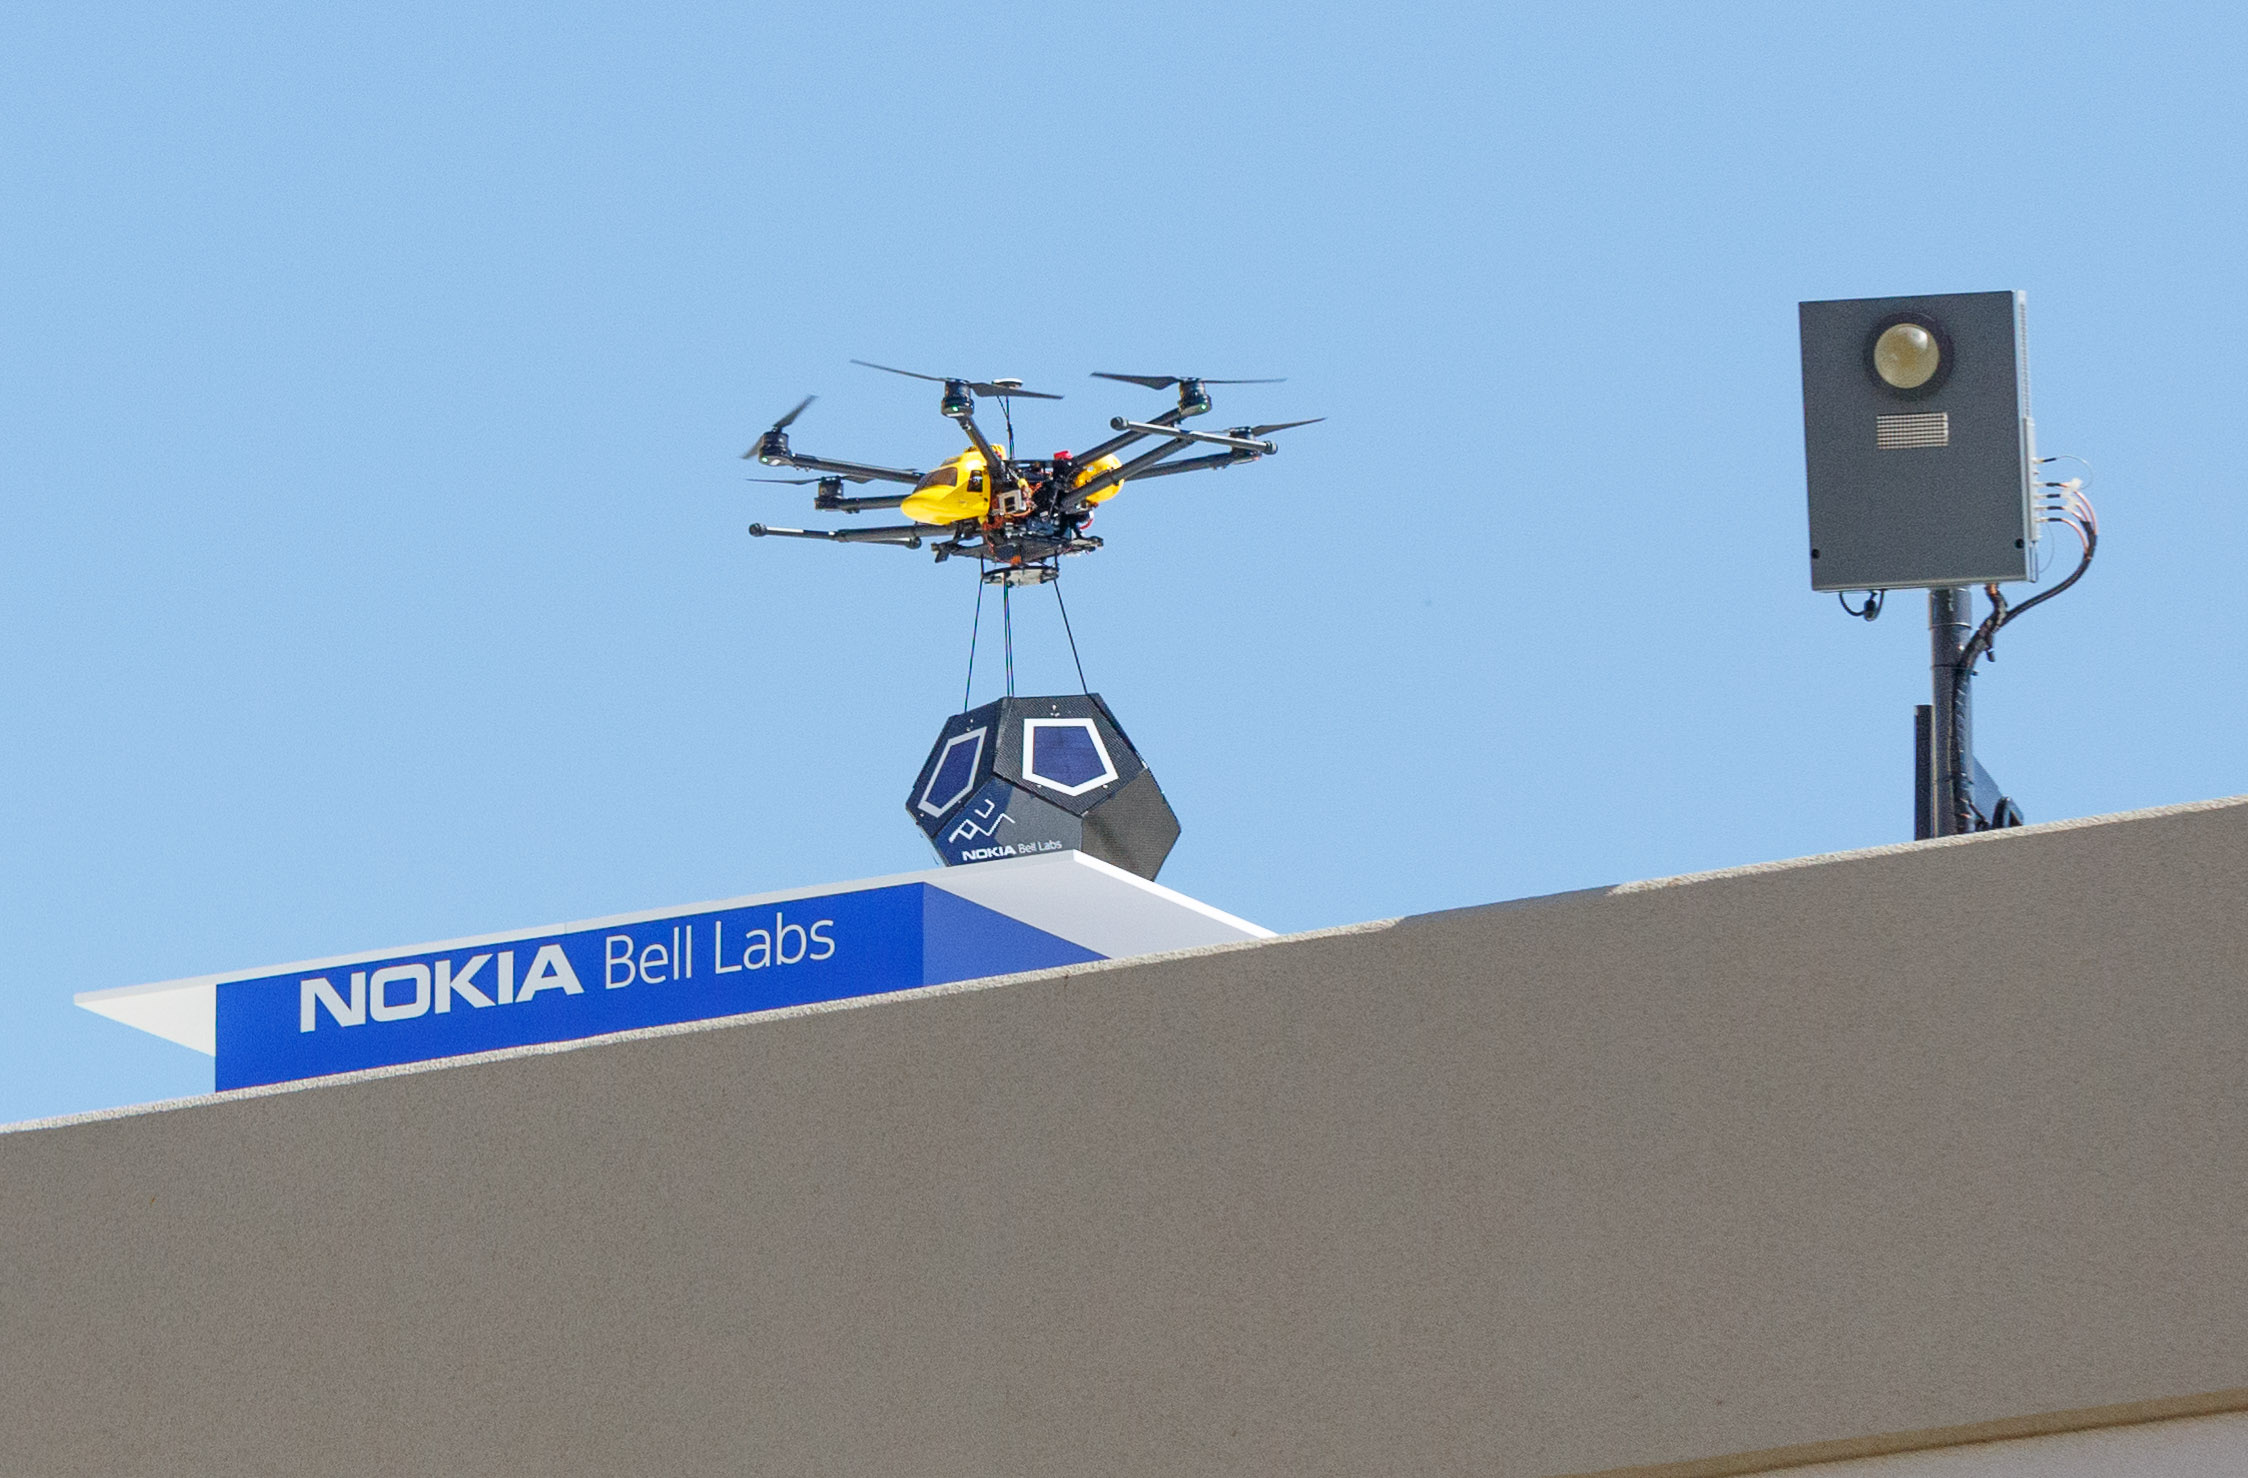 A drone lands portableA drone lands a portable, solar-powered, short-range high-speed network unit called a Future Cell on a roof near Nokia Bell Labs in Sunnyvale, California., solar-powered, short-range high-speed network unit called a Future Cell on a roof near Nokia Bell Labs in Sunnyvale, California.